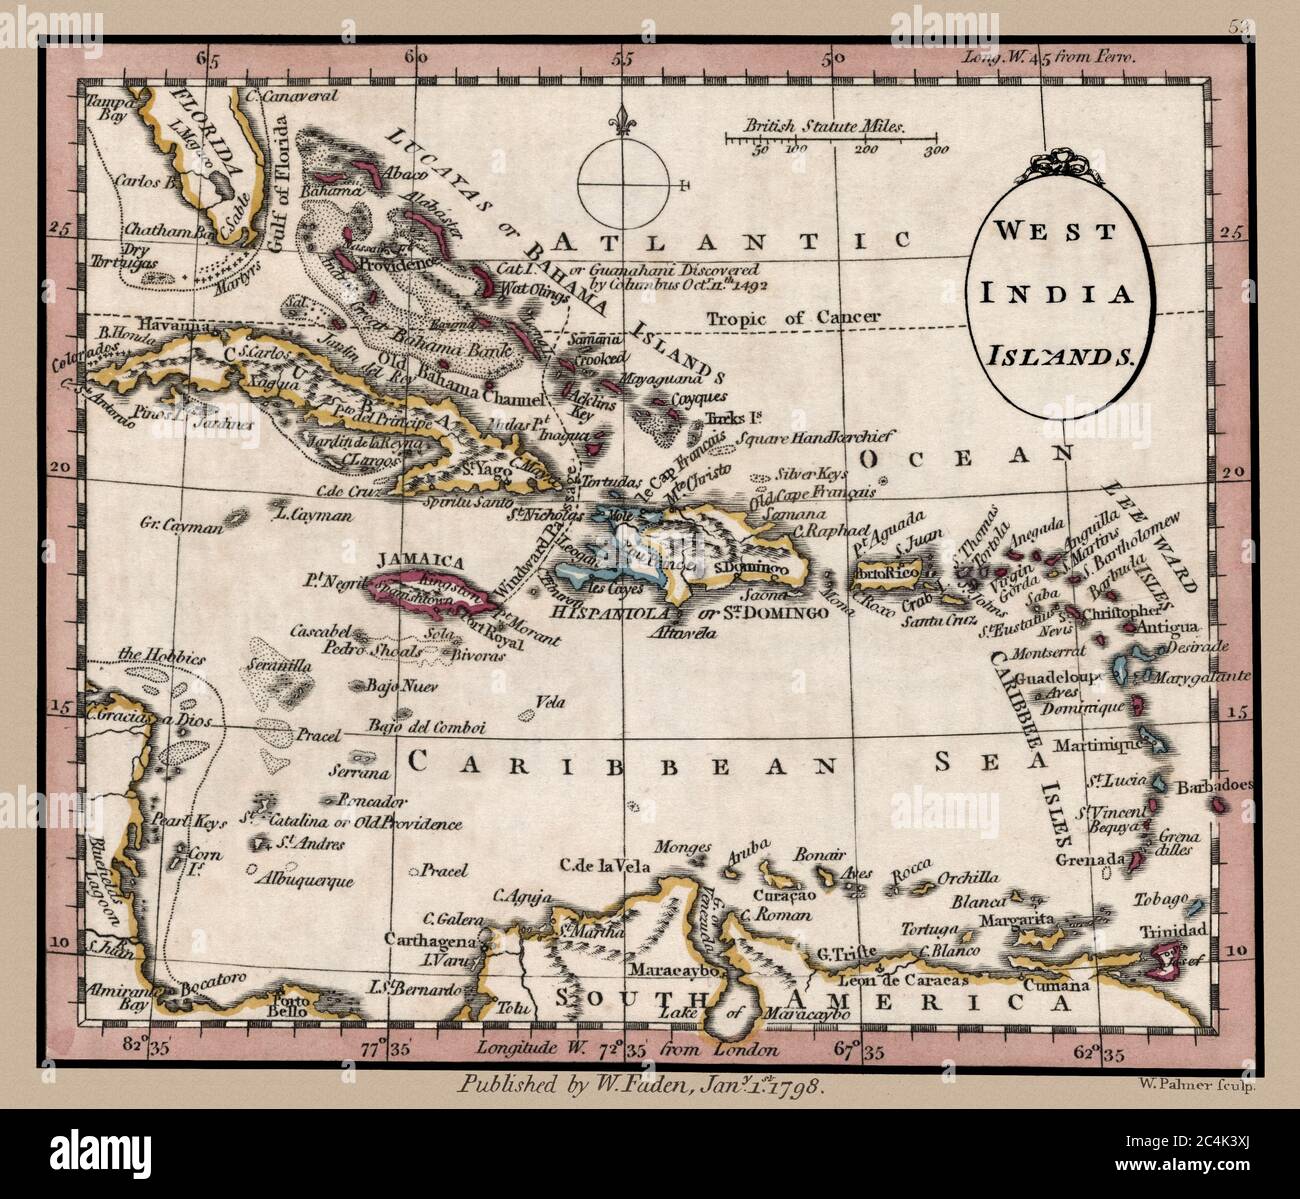 "West India Islands." Map shows islands and important landmarks of the Caribbean Sea. This is a beautifully detailed historic map reproduction. Original from a British atlas published by famed cartographer William Faden was created circa 1798. Stock Photo